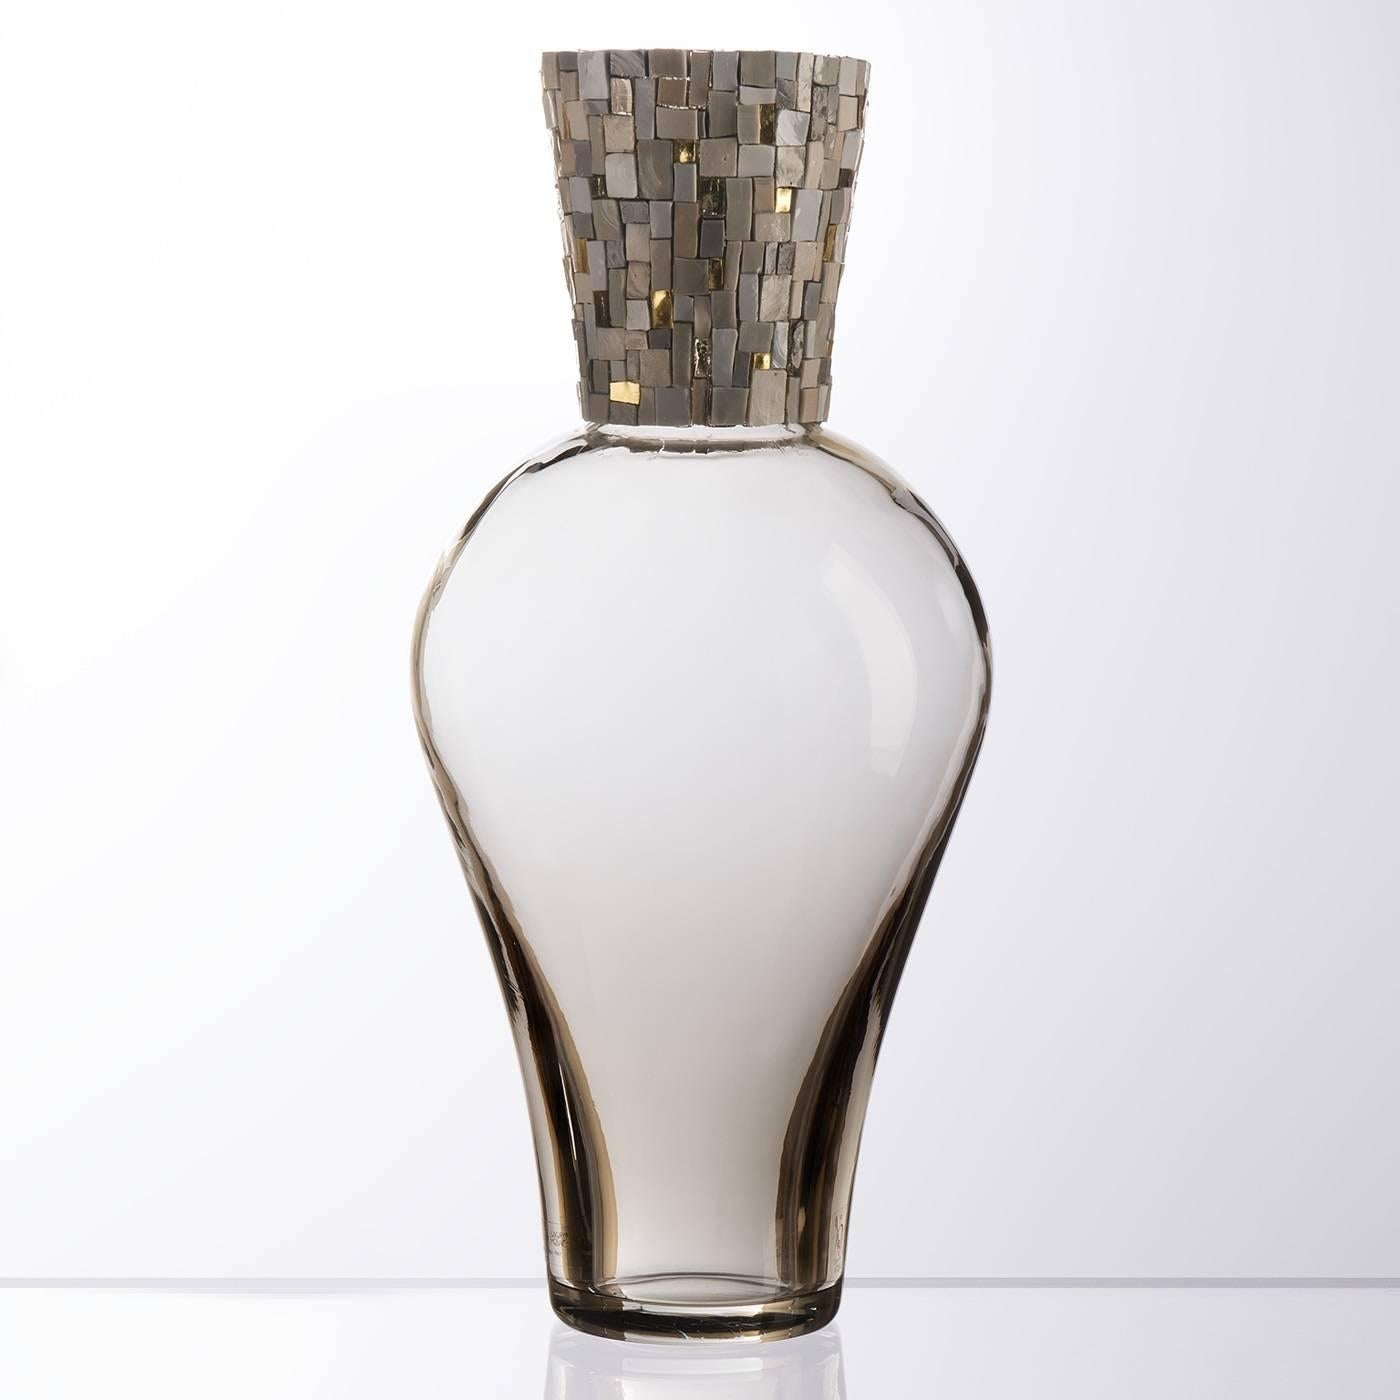 Simple yet elegant, this Murano mouth-blown vase is crafted entirely by hand using traditional glass-making methods by Murano master artisans. Its amphora-shaped body is made of a delicate grey color and features a distinctive mosaic detail, created